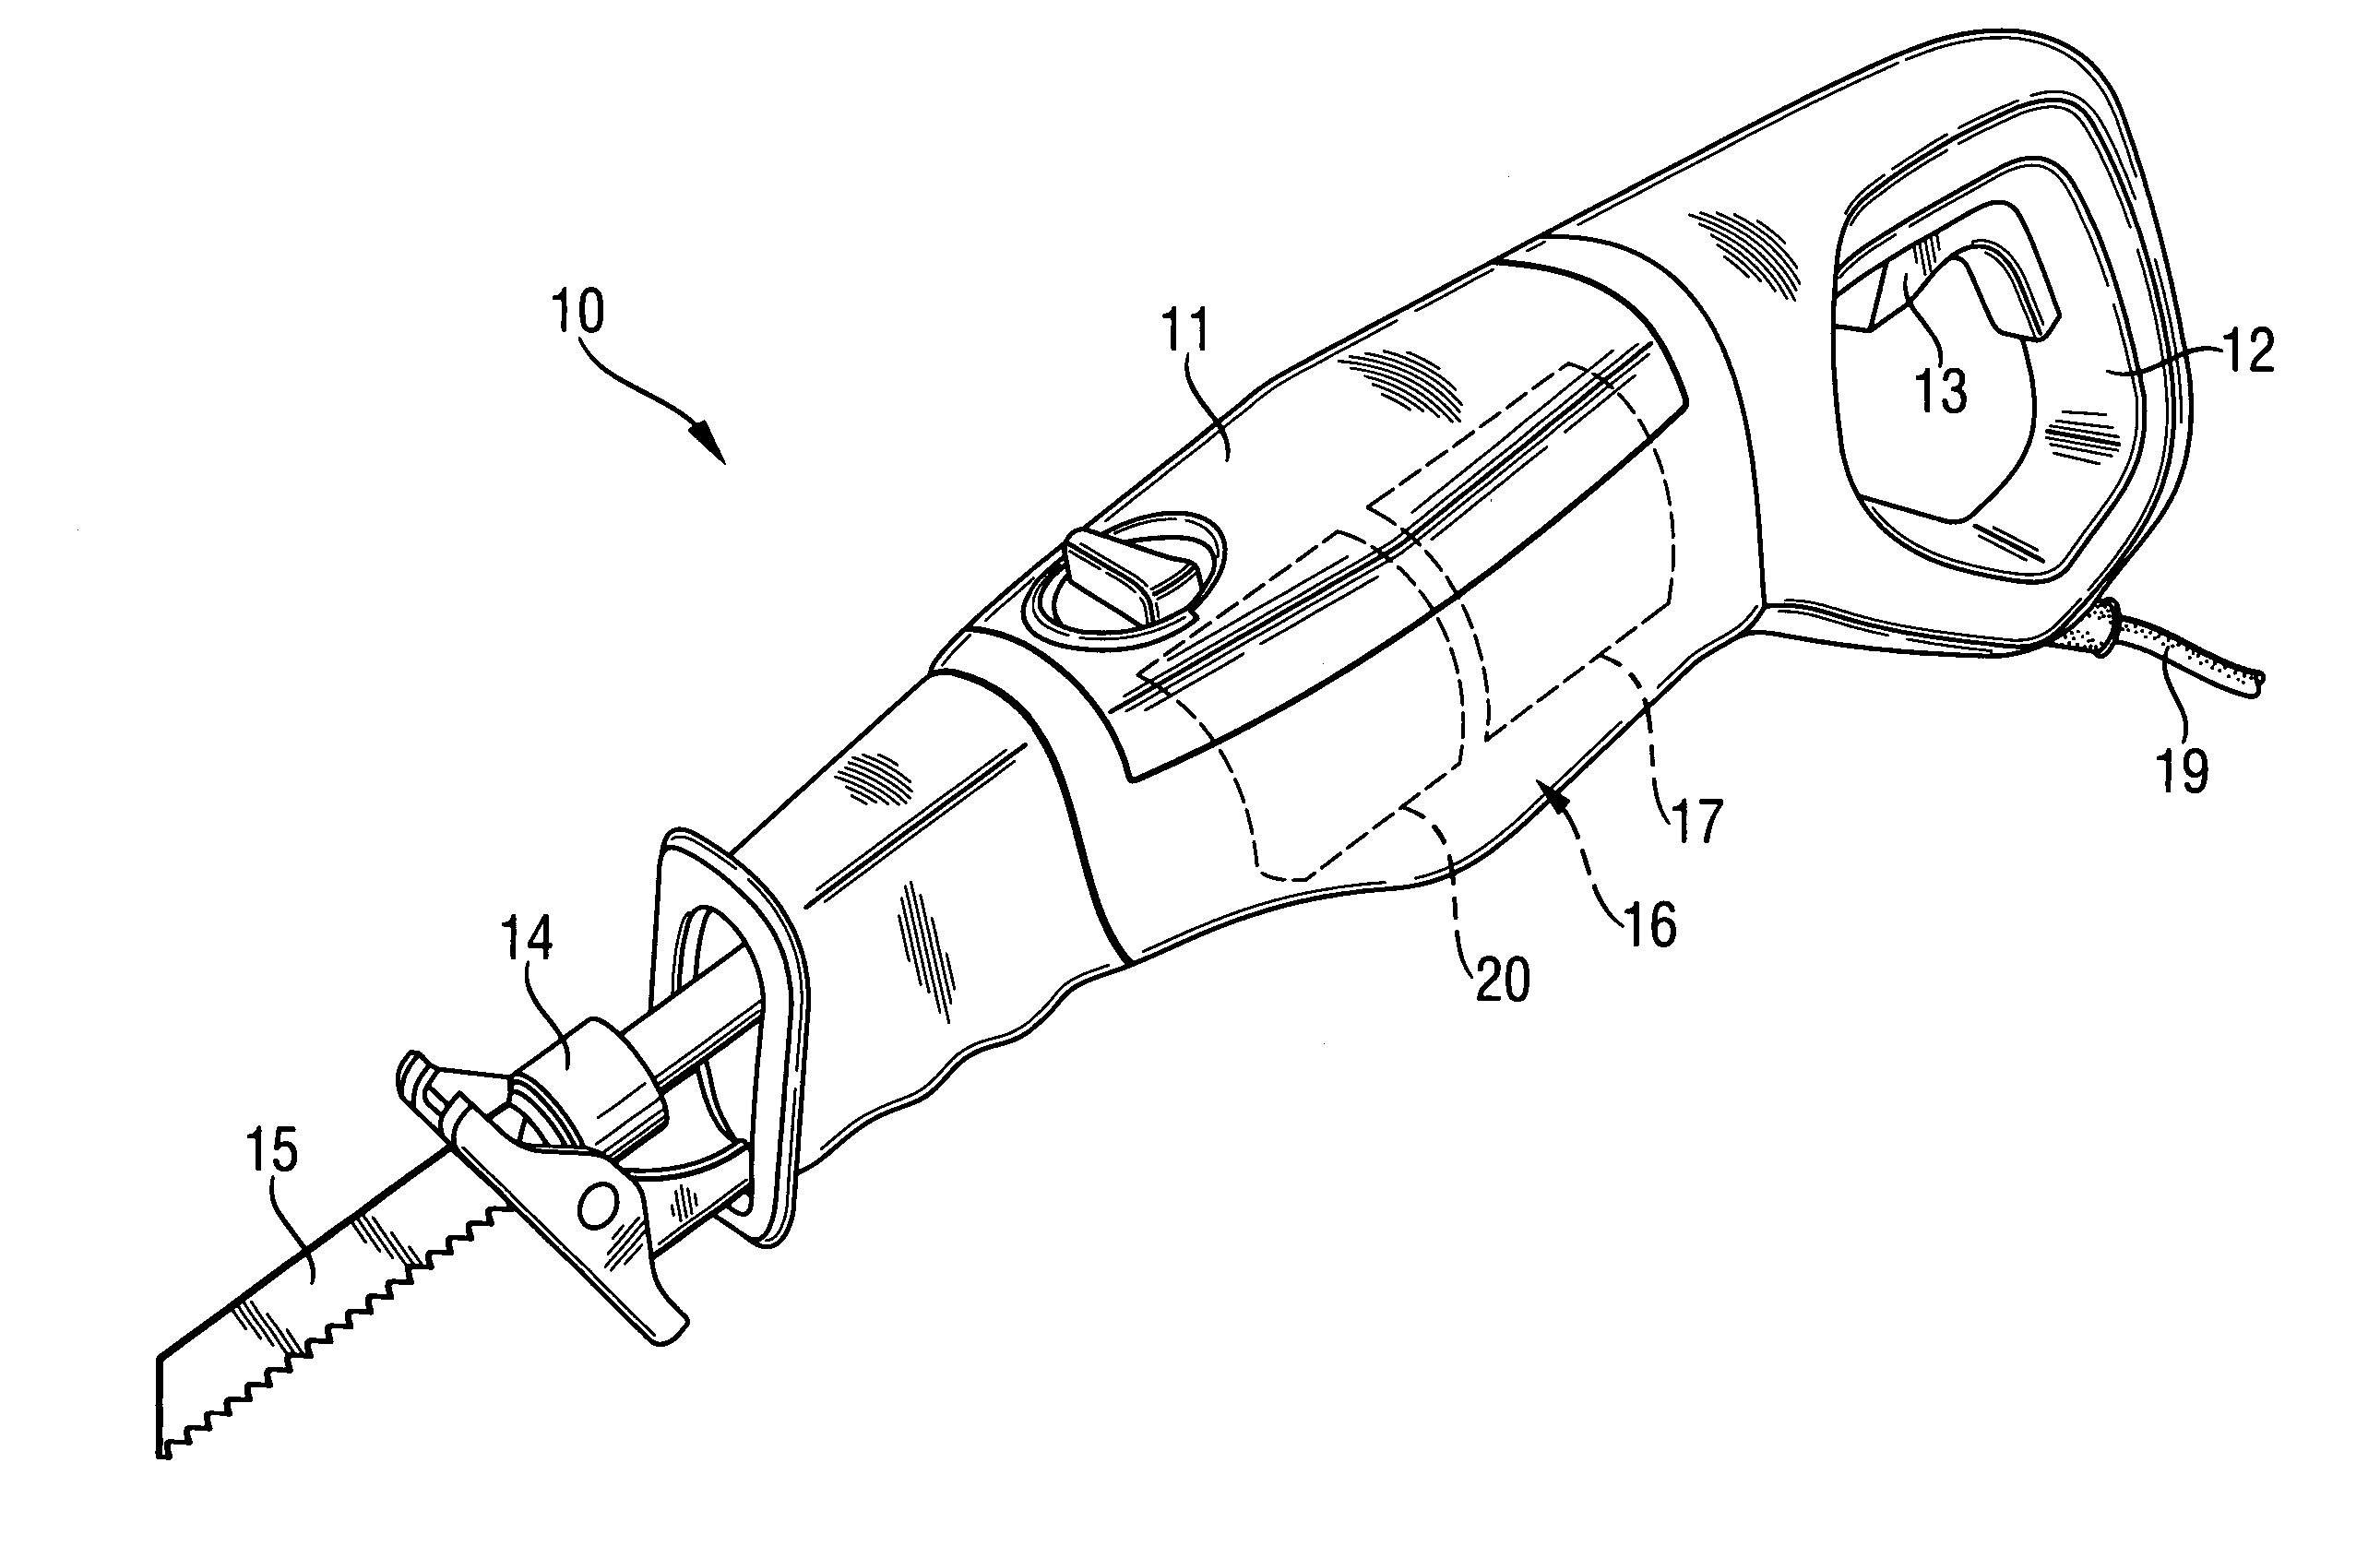 Drive for a motor-driven hand-held tool